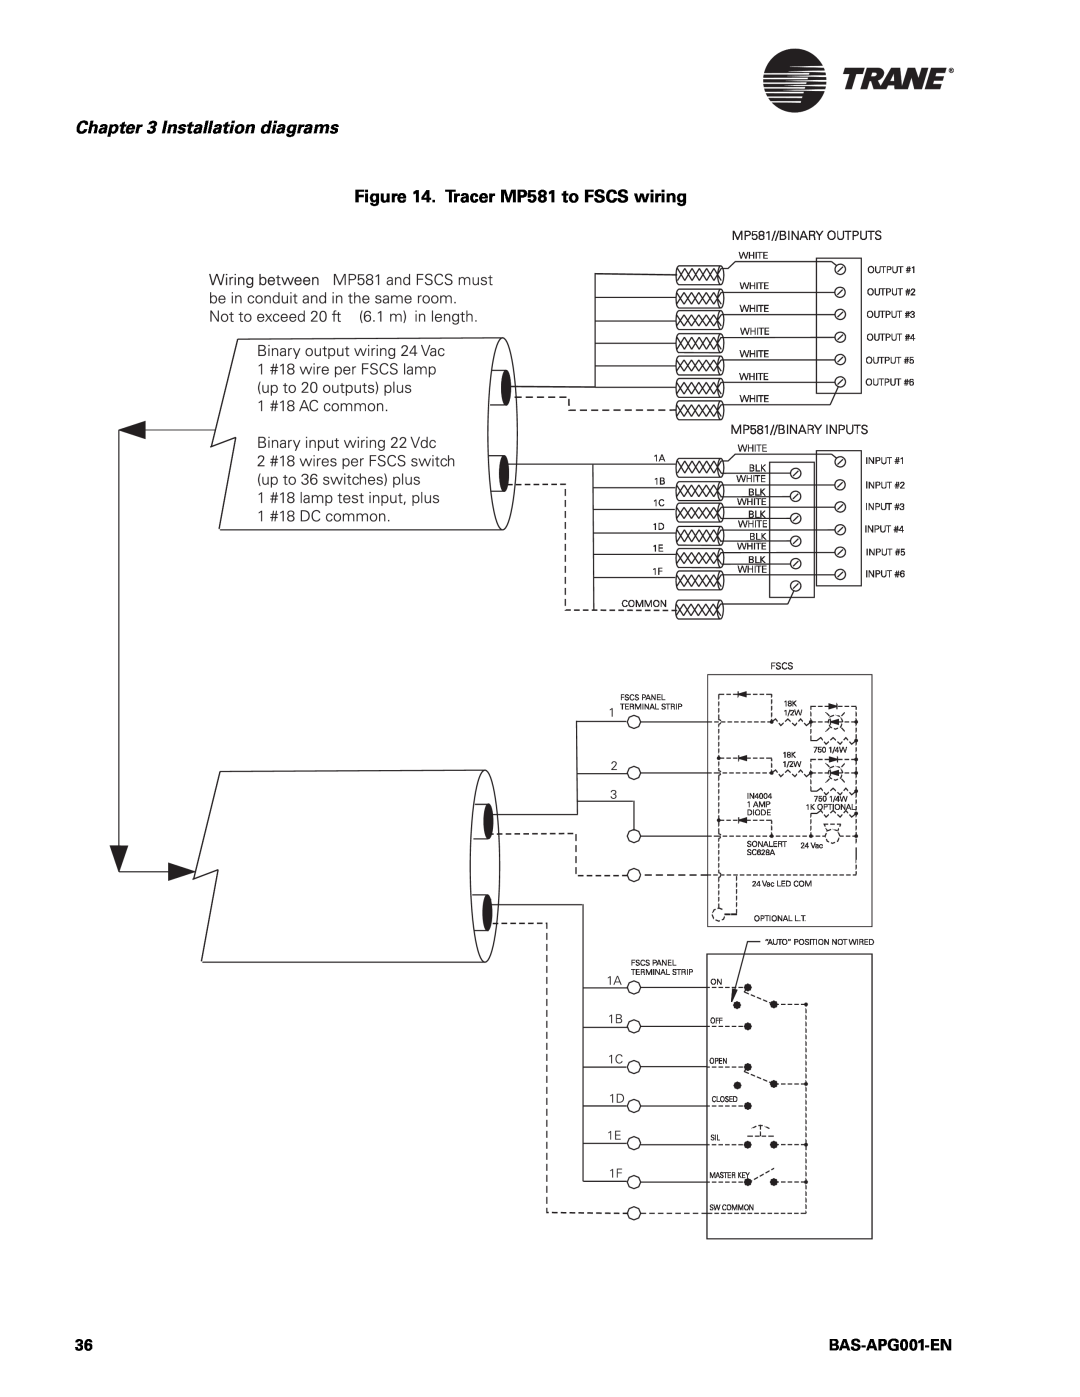 Trane BAS-APG001-EN, Engineered Smoke Control System for Tracer Summit Installation diagrams, Tracer MP581 to FSCS wiring 